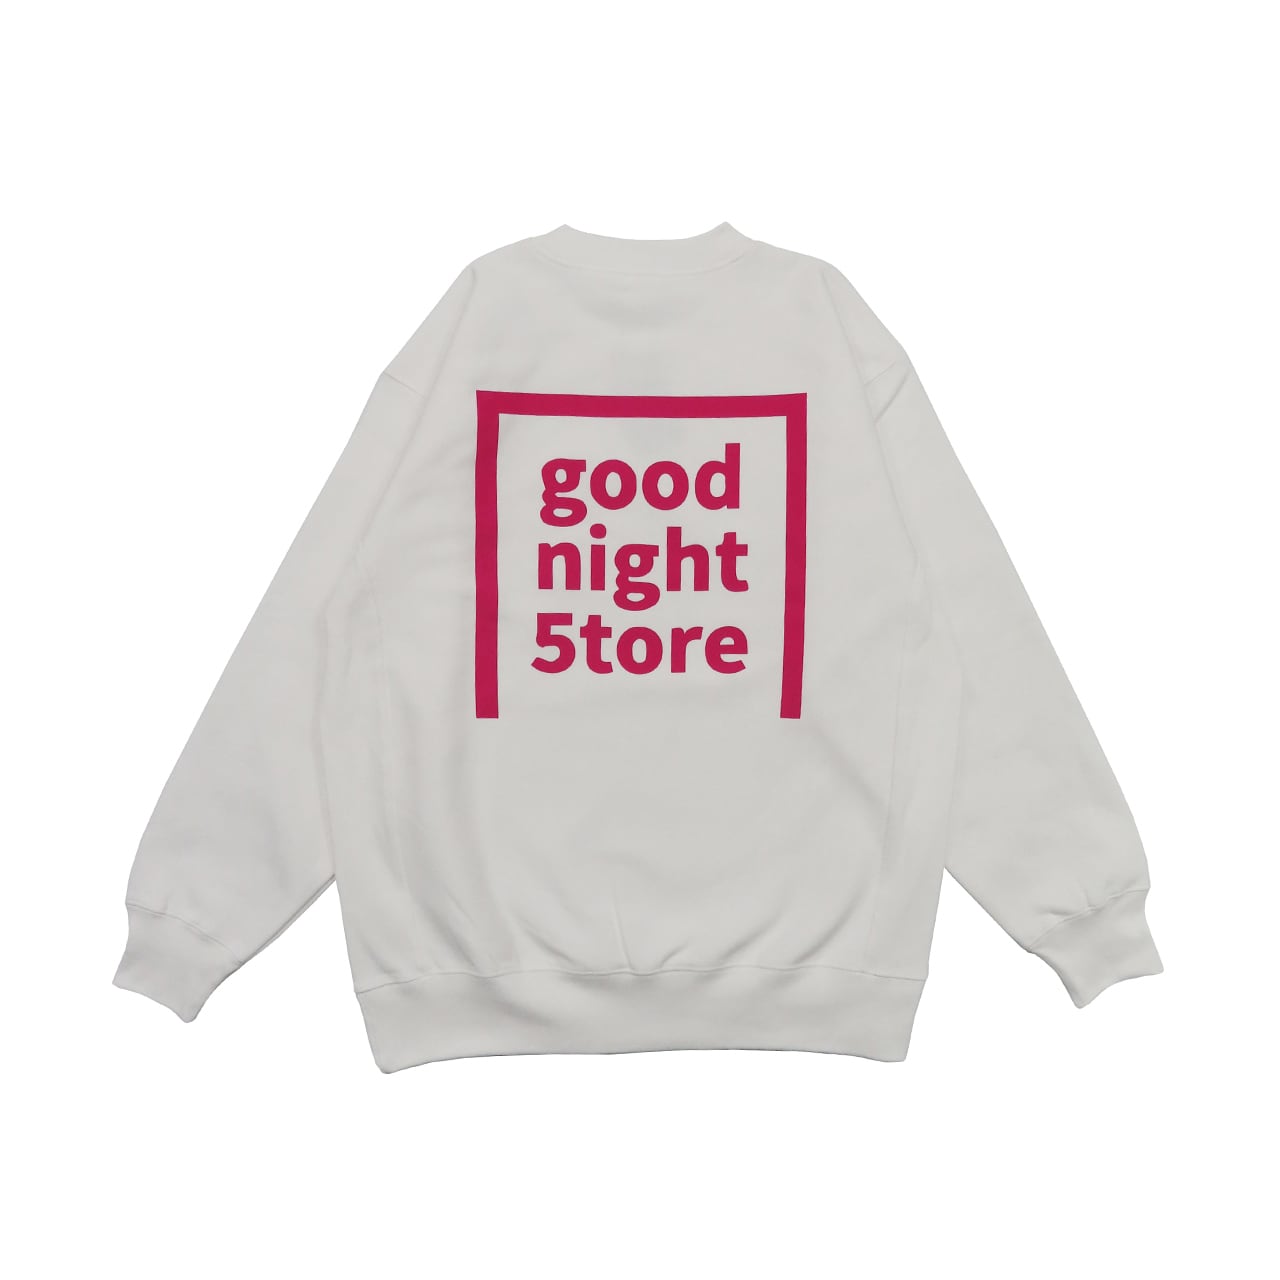 GN479 sweater white-logo pink | goodnight5tore